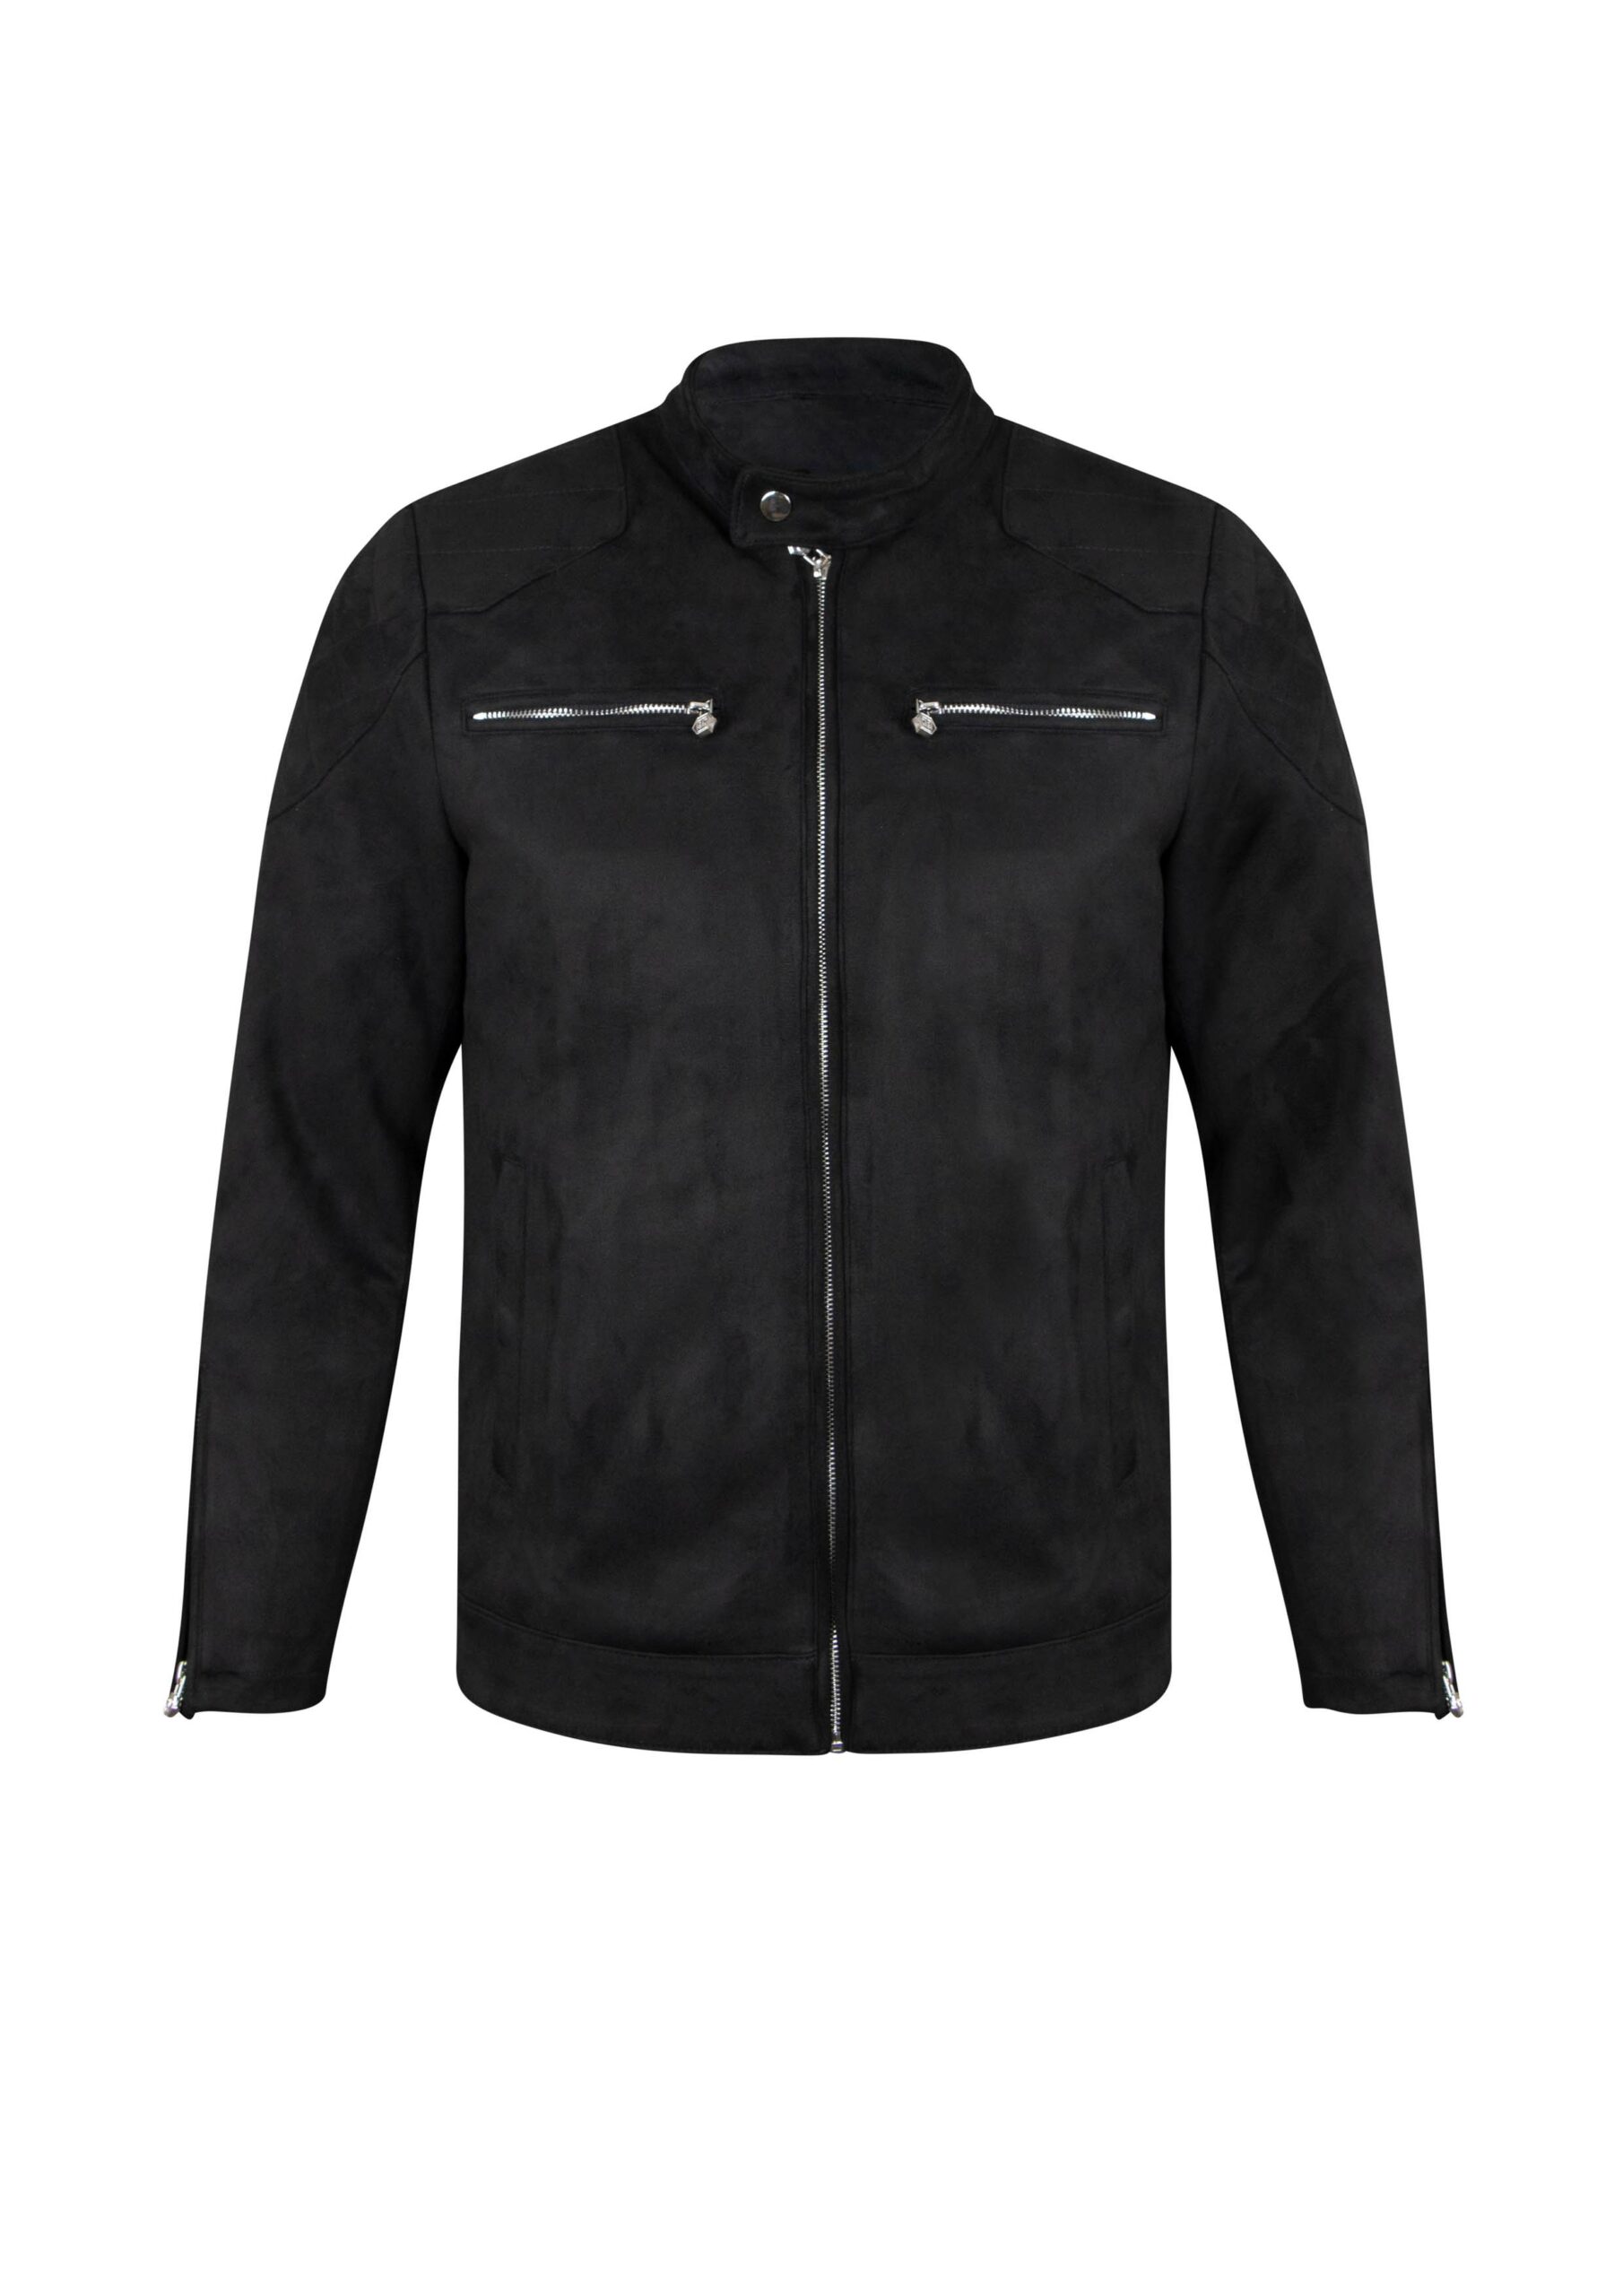 Mens Suede Jacket - Artisan Outfitters Ltd